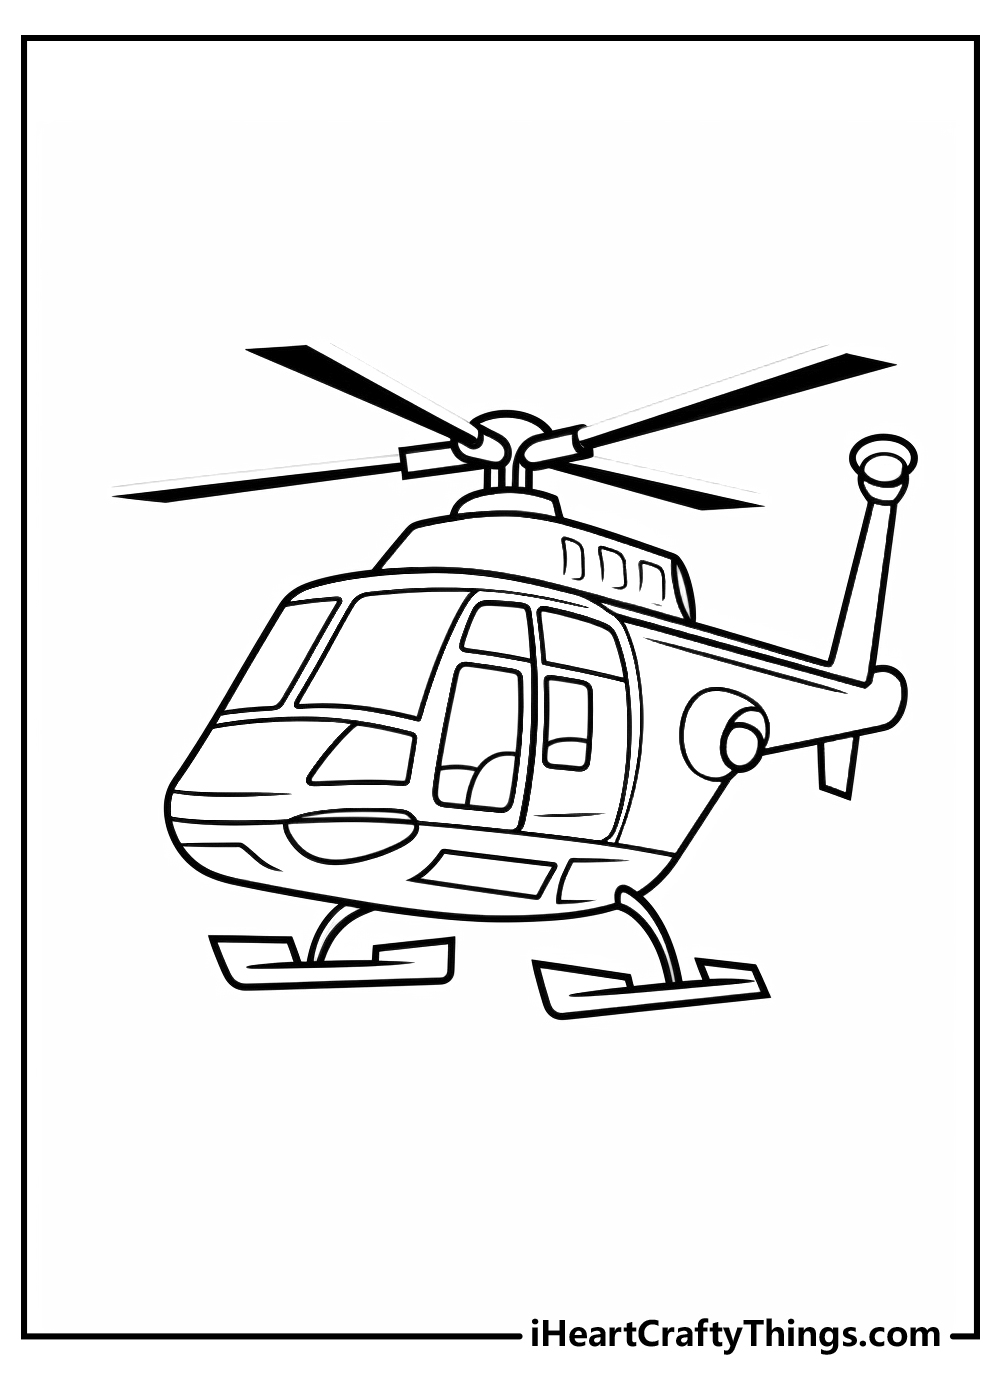 helicopter coloring pages for kids